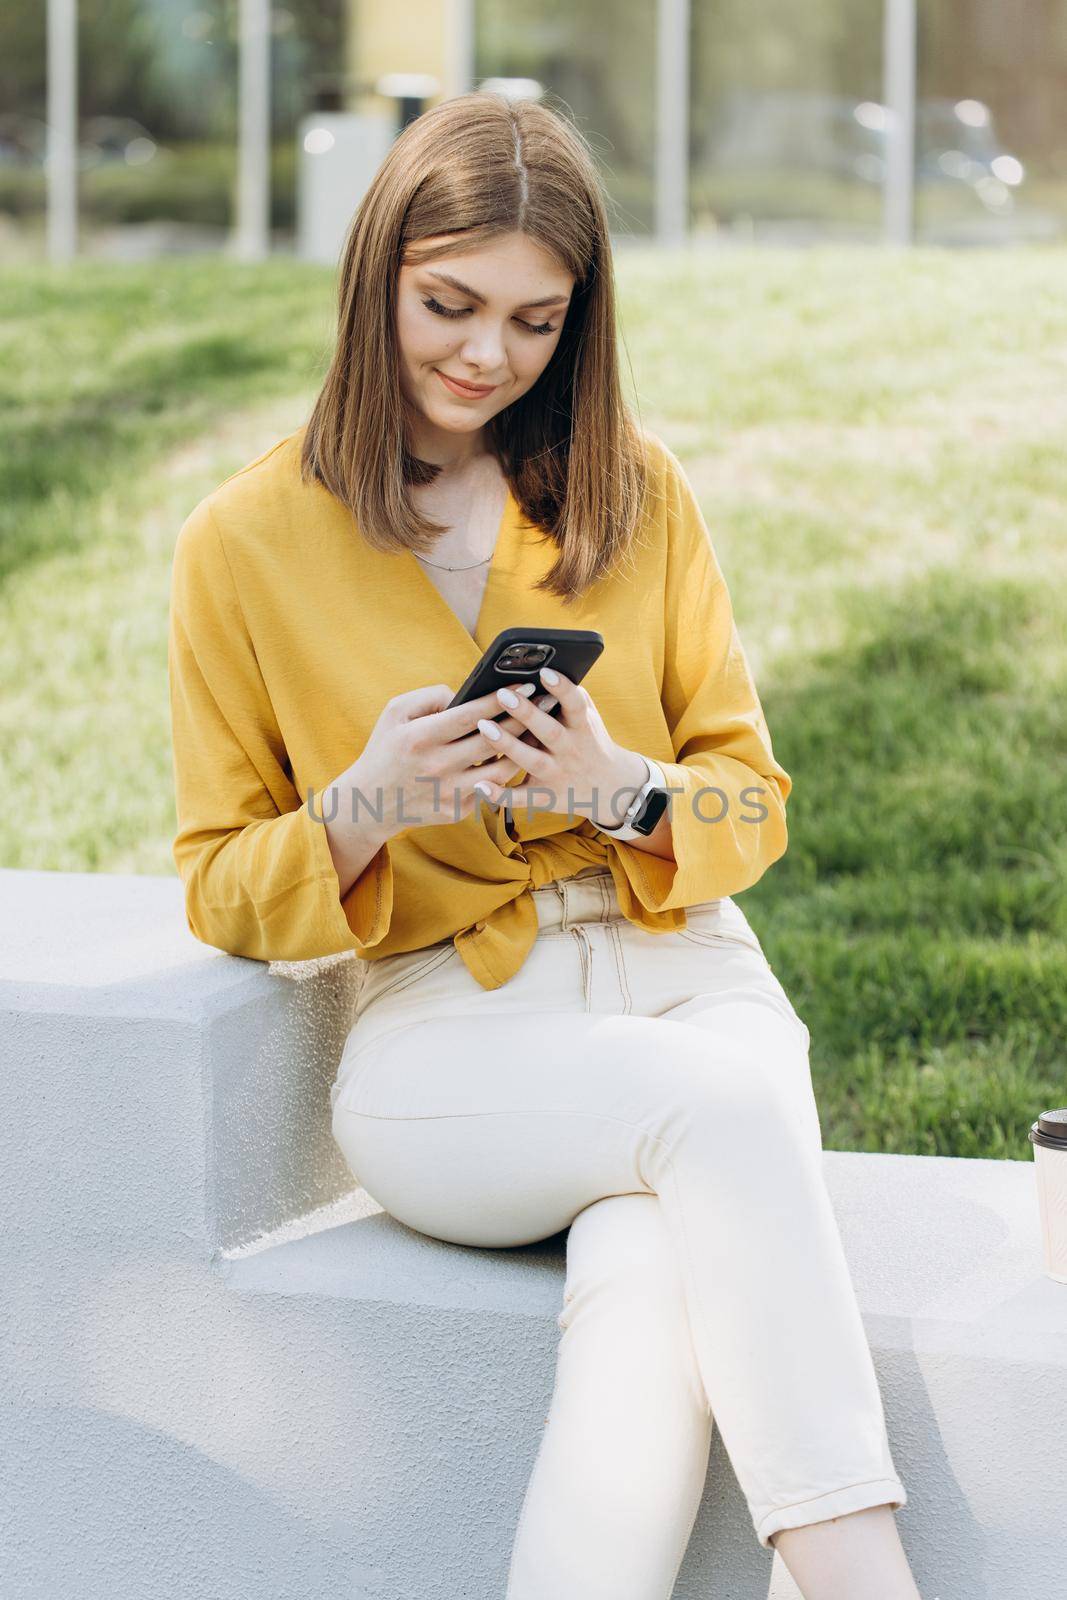 Businesswoman browsing internet on phone, drinking coffee, spending time outdoors. Business woman checking phone content online outdoor. Smiling female freelancer looking phone at remote office by uflypro